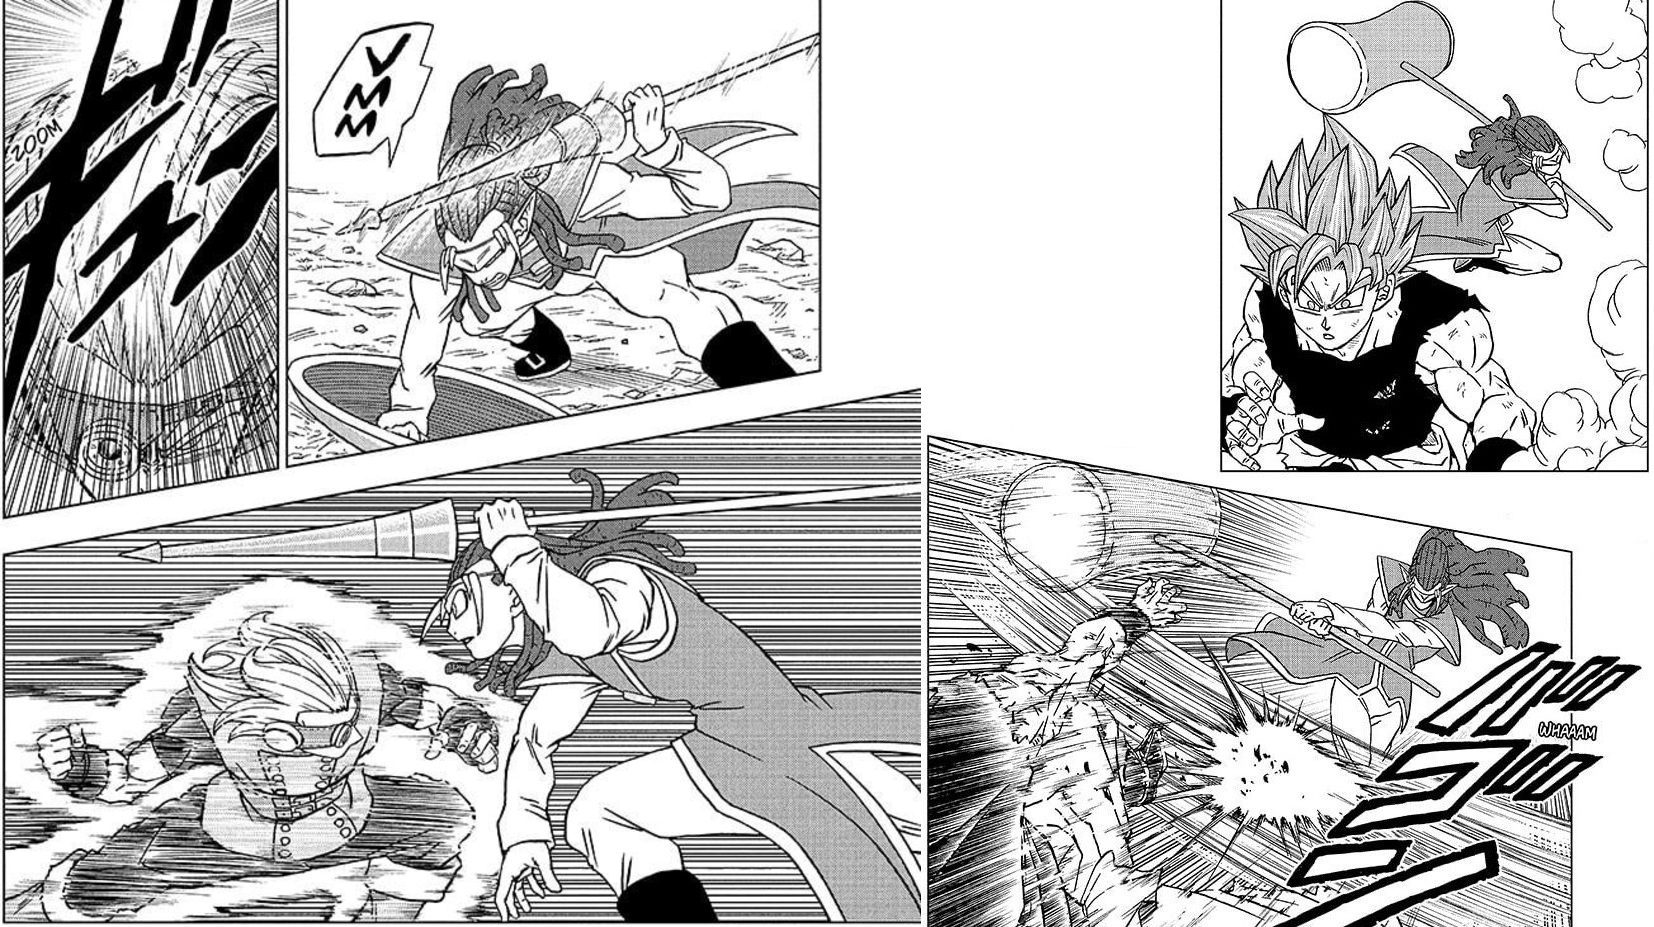 Gas uses a hammer and a spear to attack Goku and Granolah